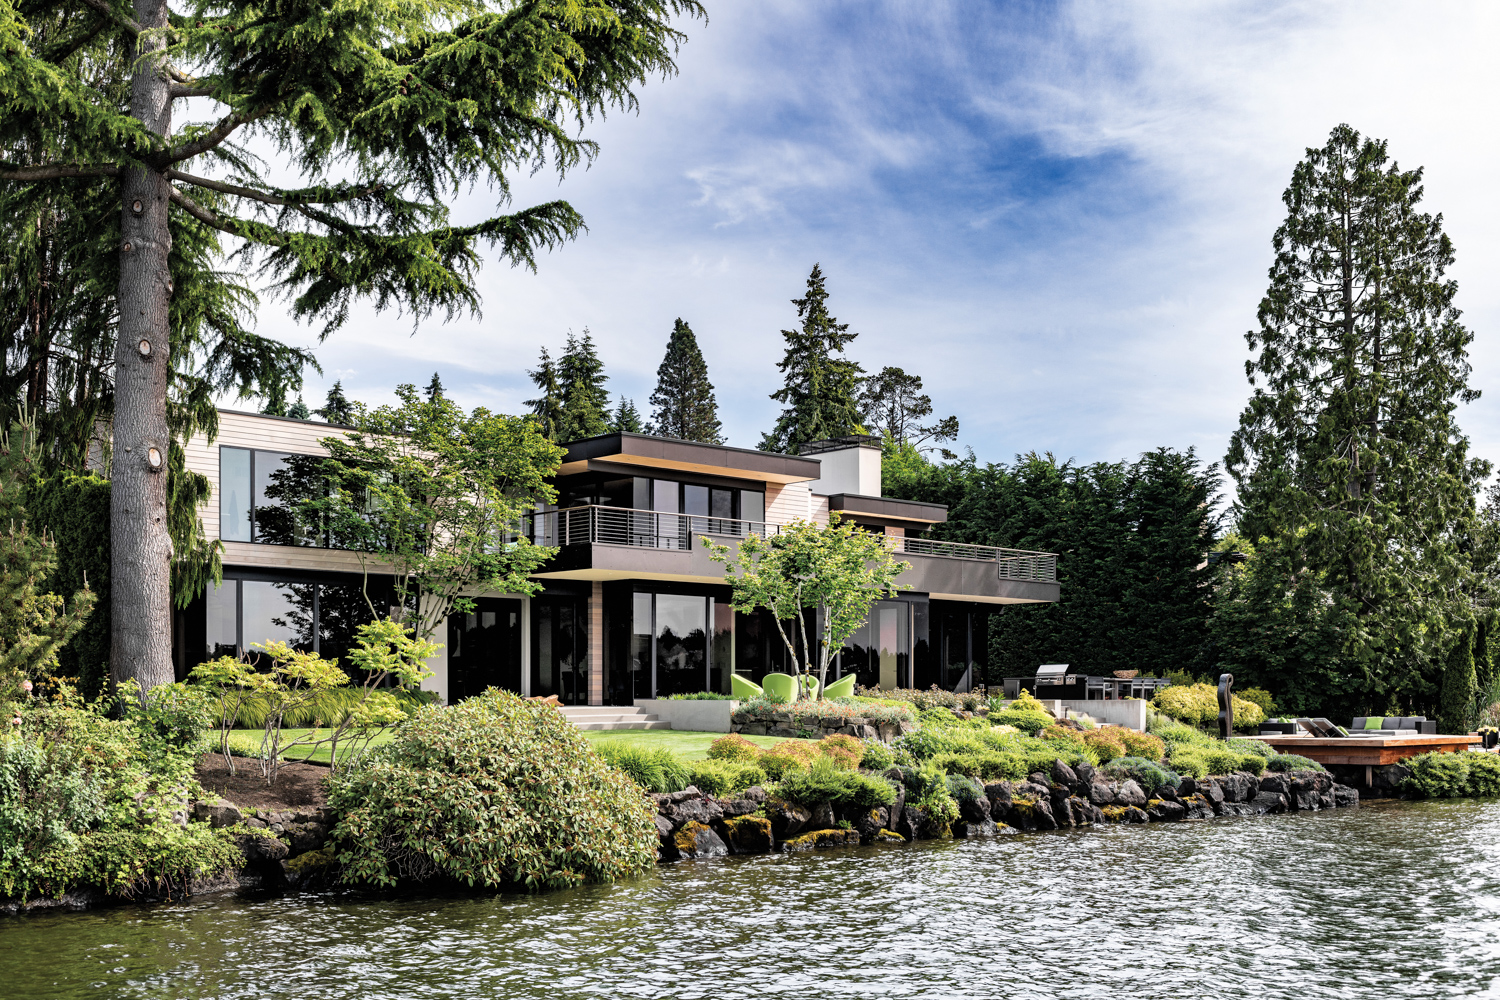 Behind The Thoughtful Update Of A Notable 1970s Northwest Home